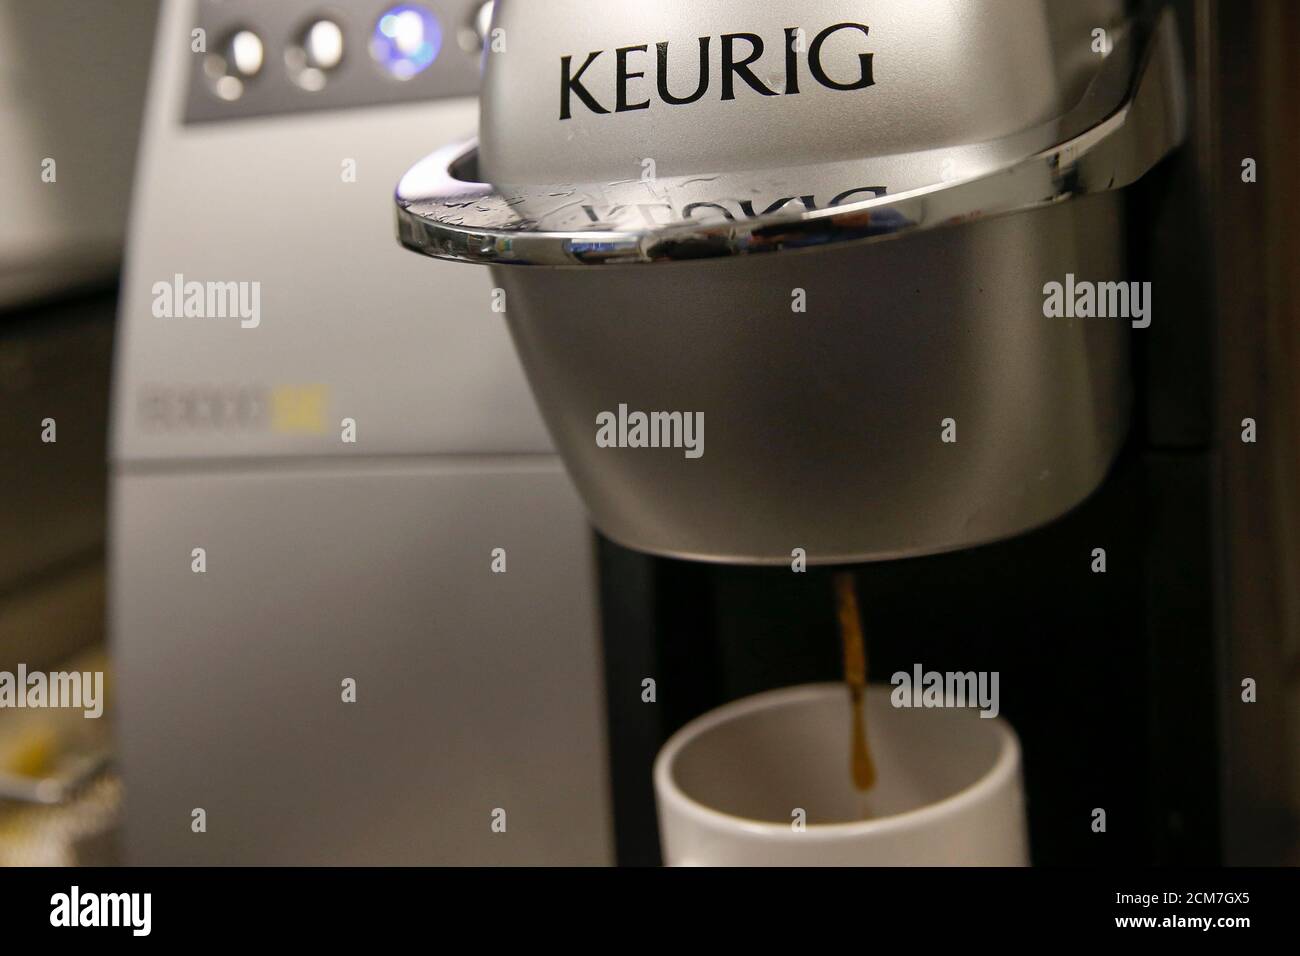 Keurig Green Mountain High Resolution Stock Photography and Images - Alamy